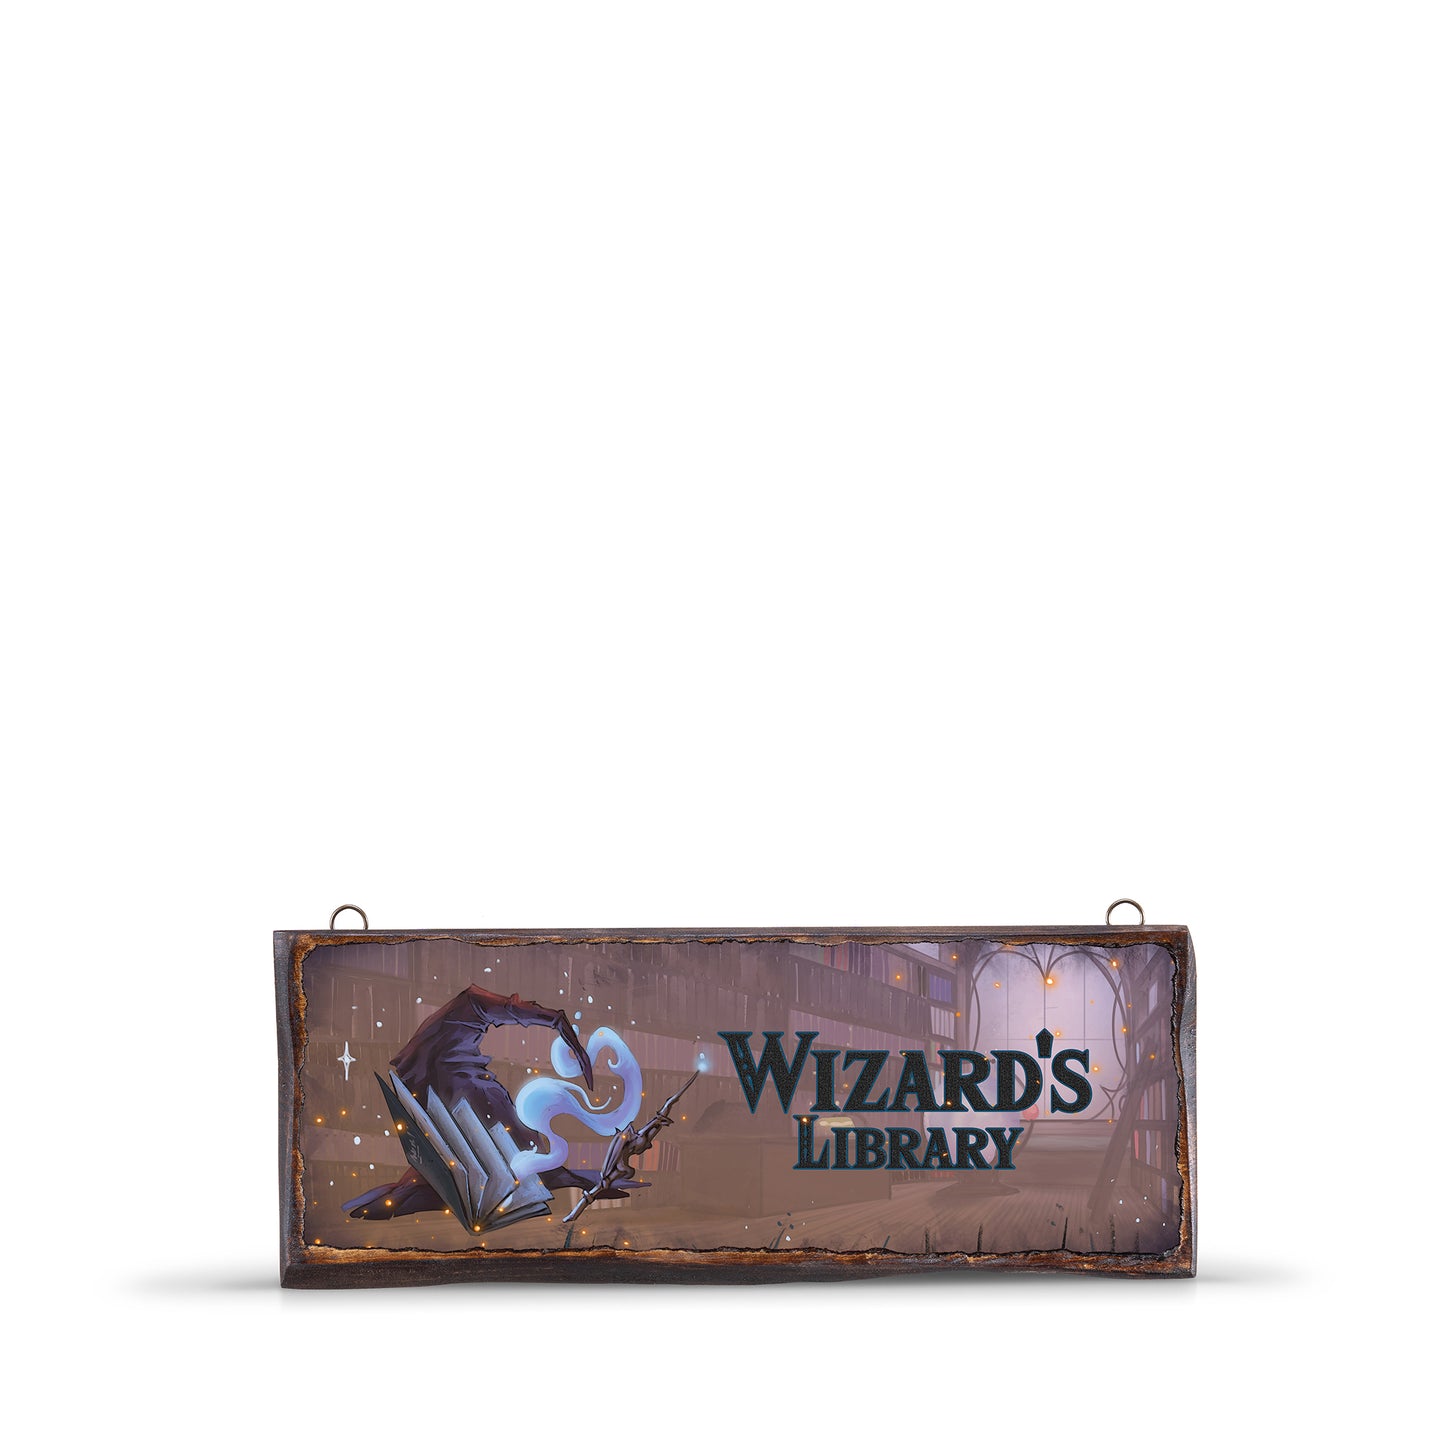 WIZARD'S LIBRARY WOODEN SIGN - WS014 - Apnoia